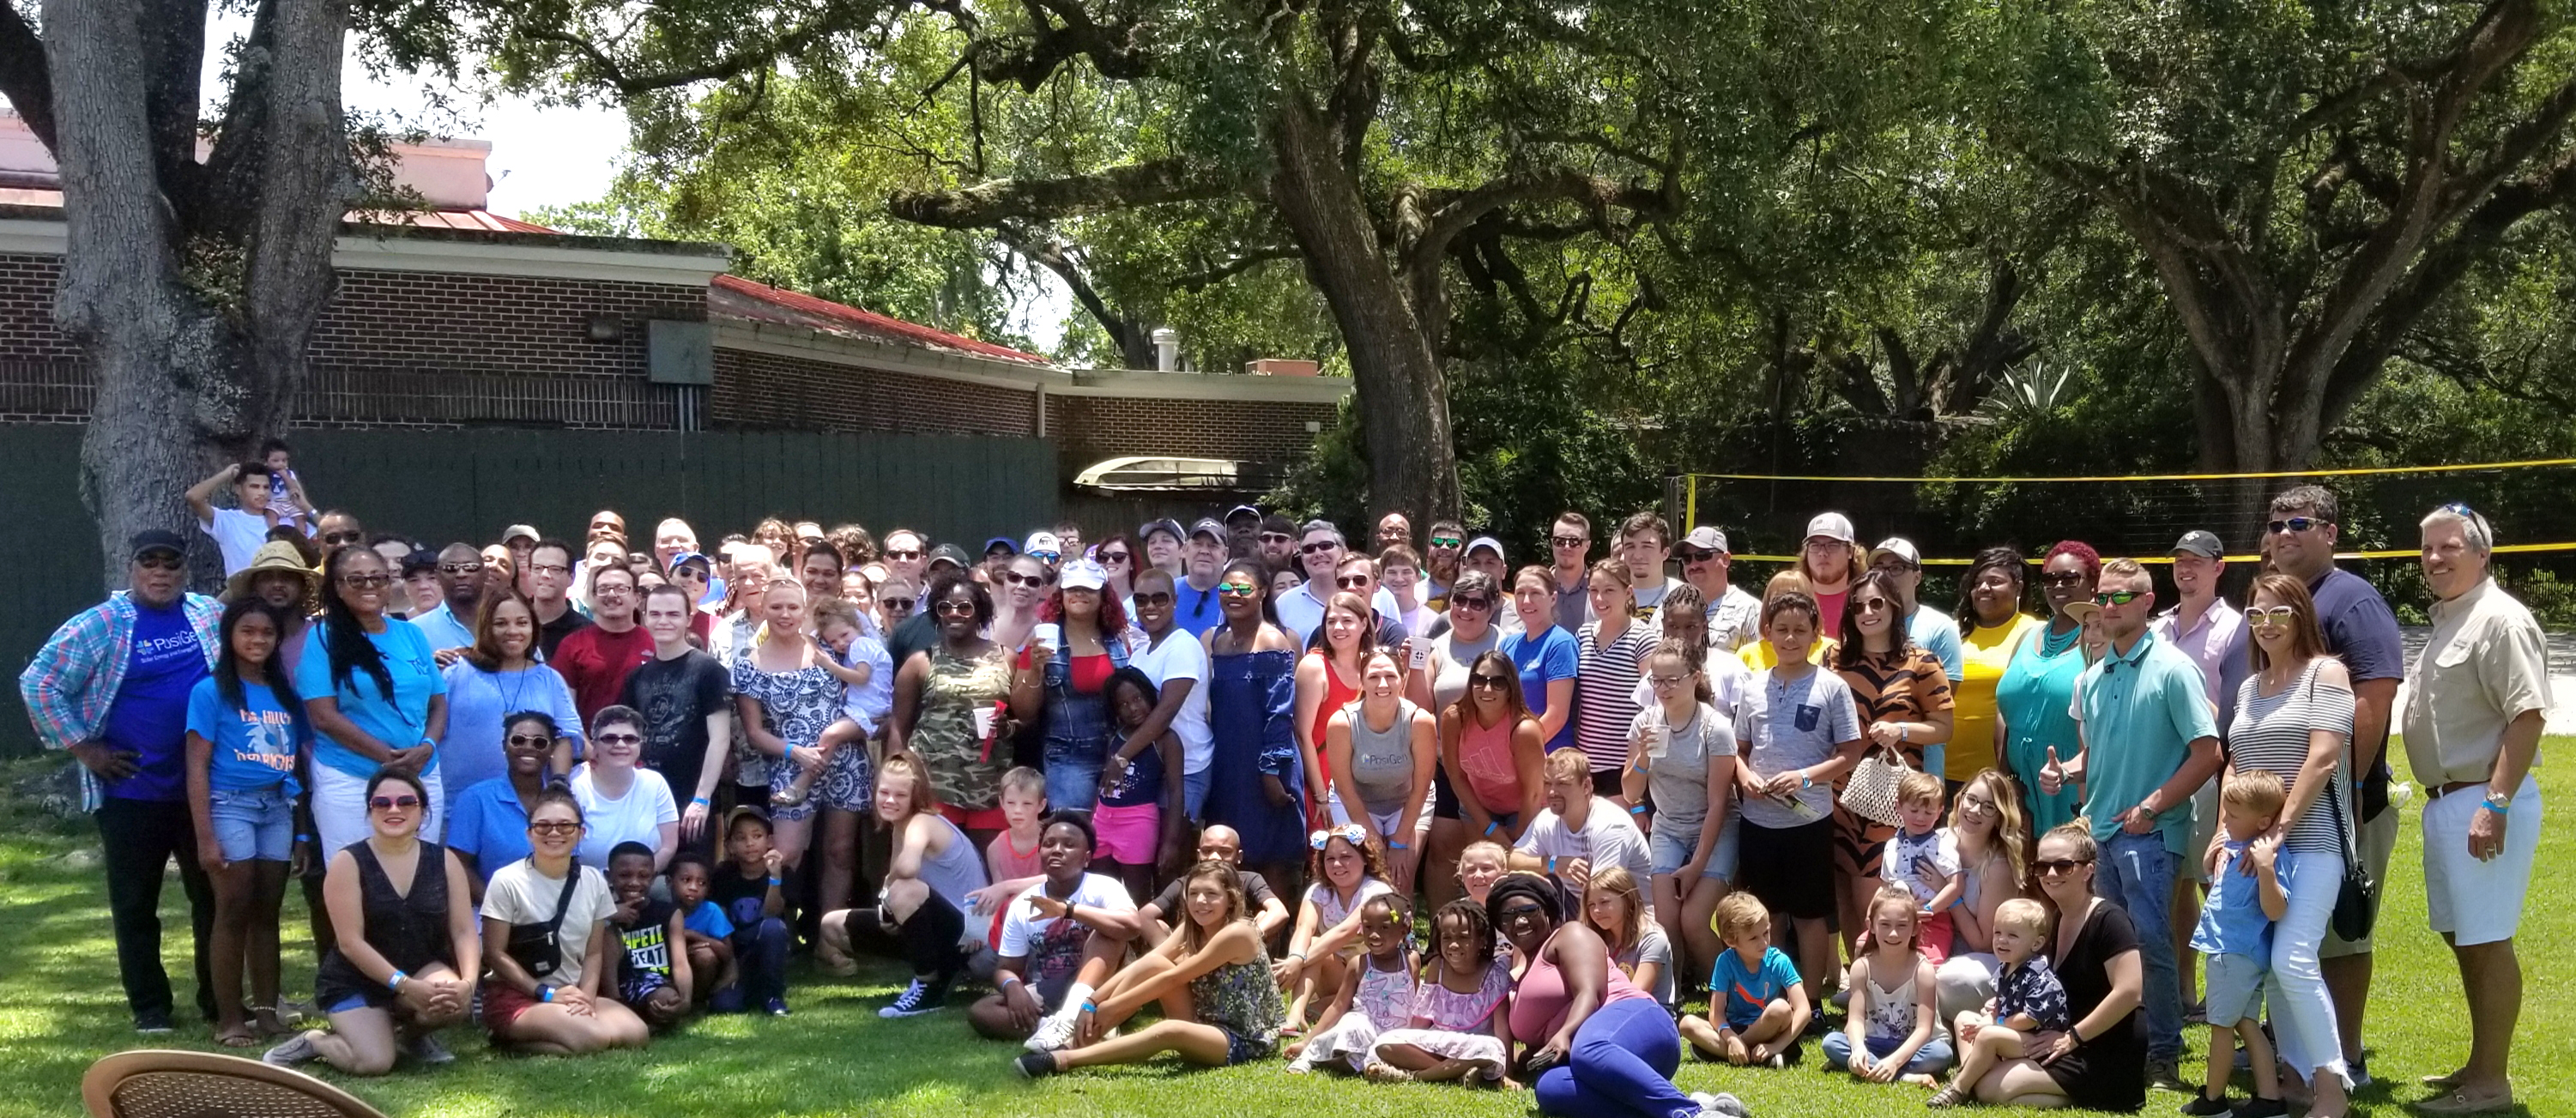 New Orleans Picnic 2019